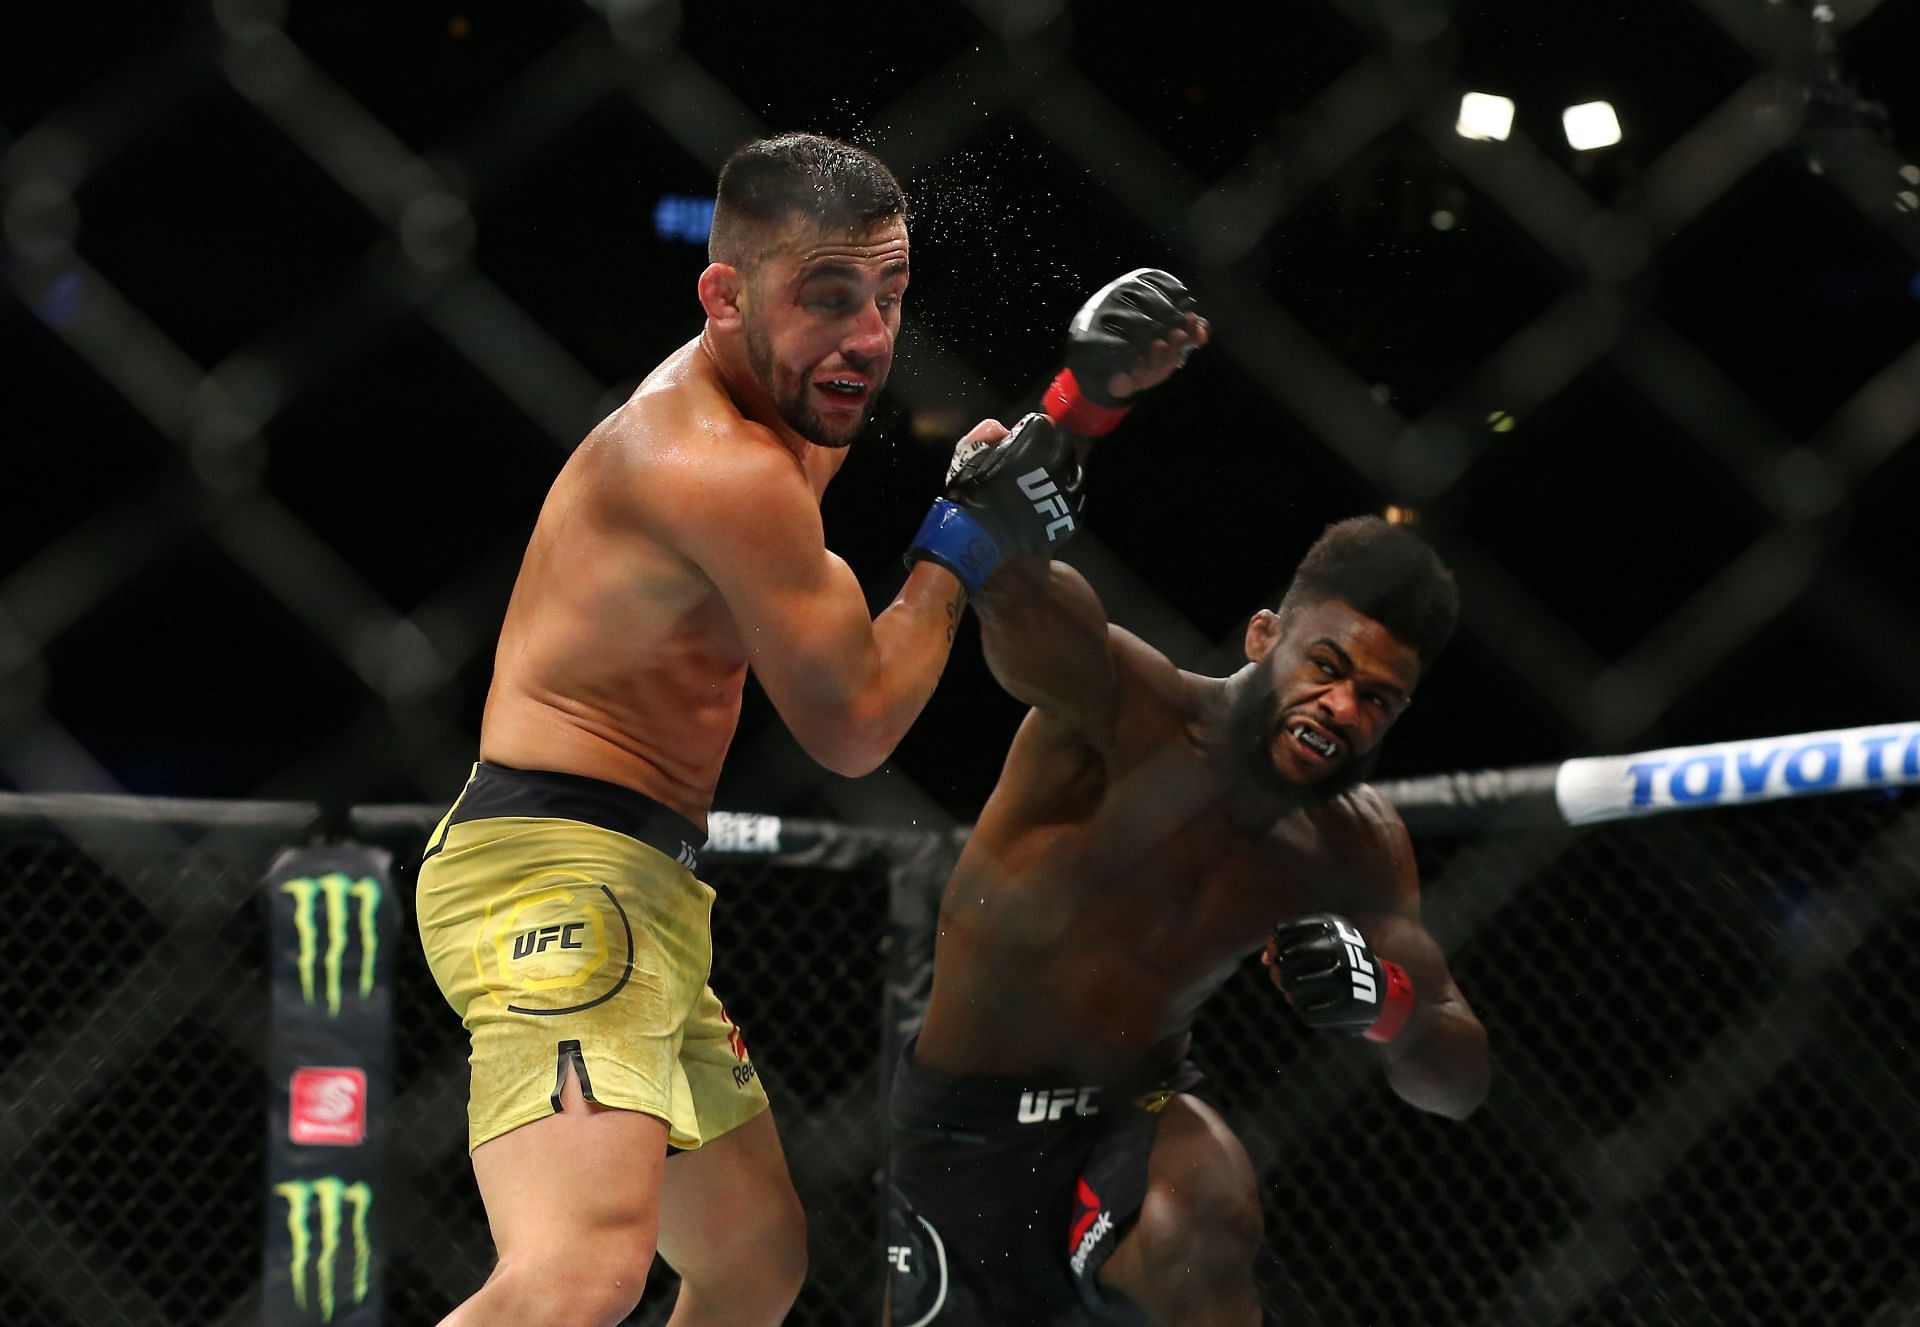 Aljamain Sterling has always faced tough opponents during his UFC career